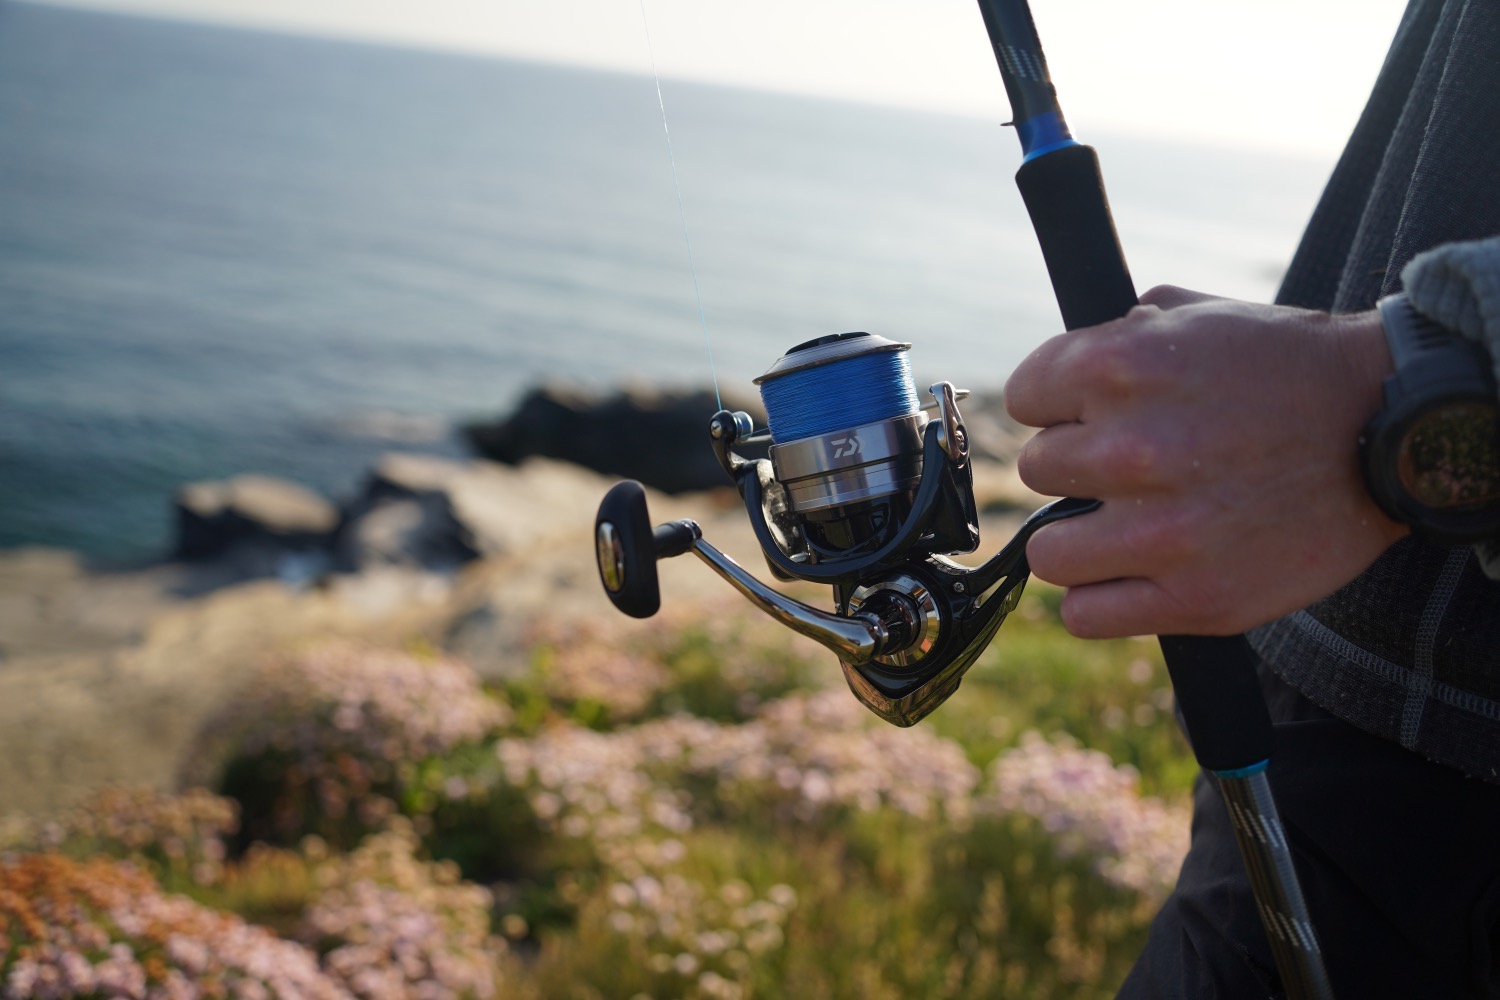 HOW TO SET UP A SPINCASTING RIG FOR PINK SALMON FISHING